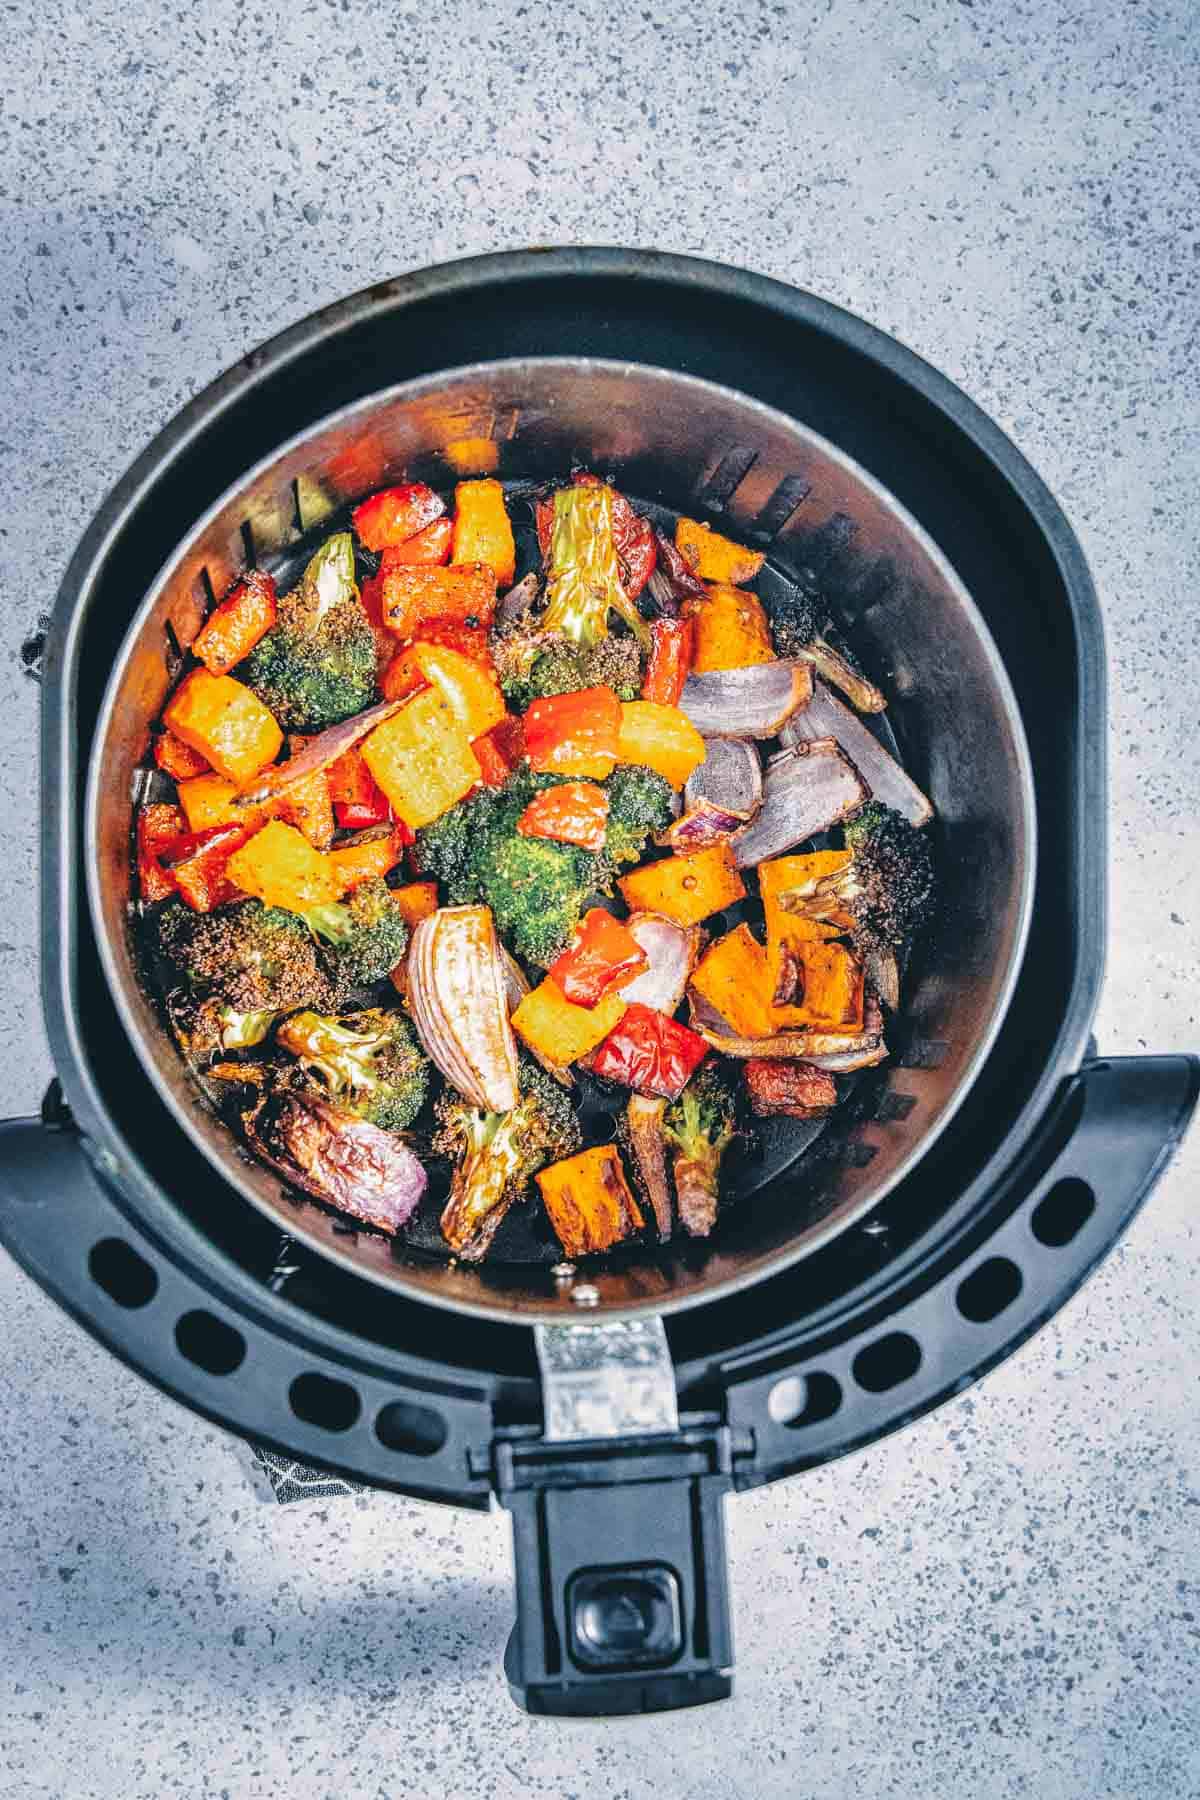 An air fryer filled with vegetables.